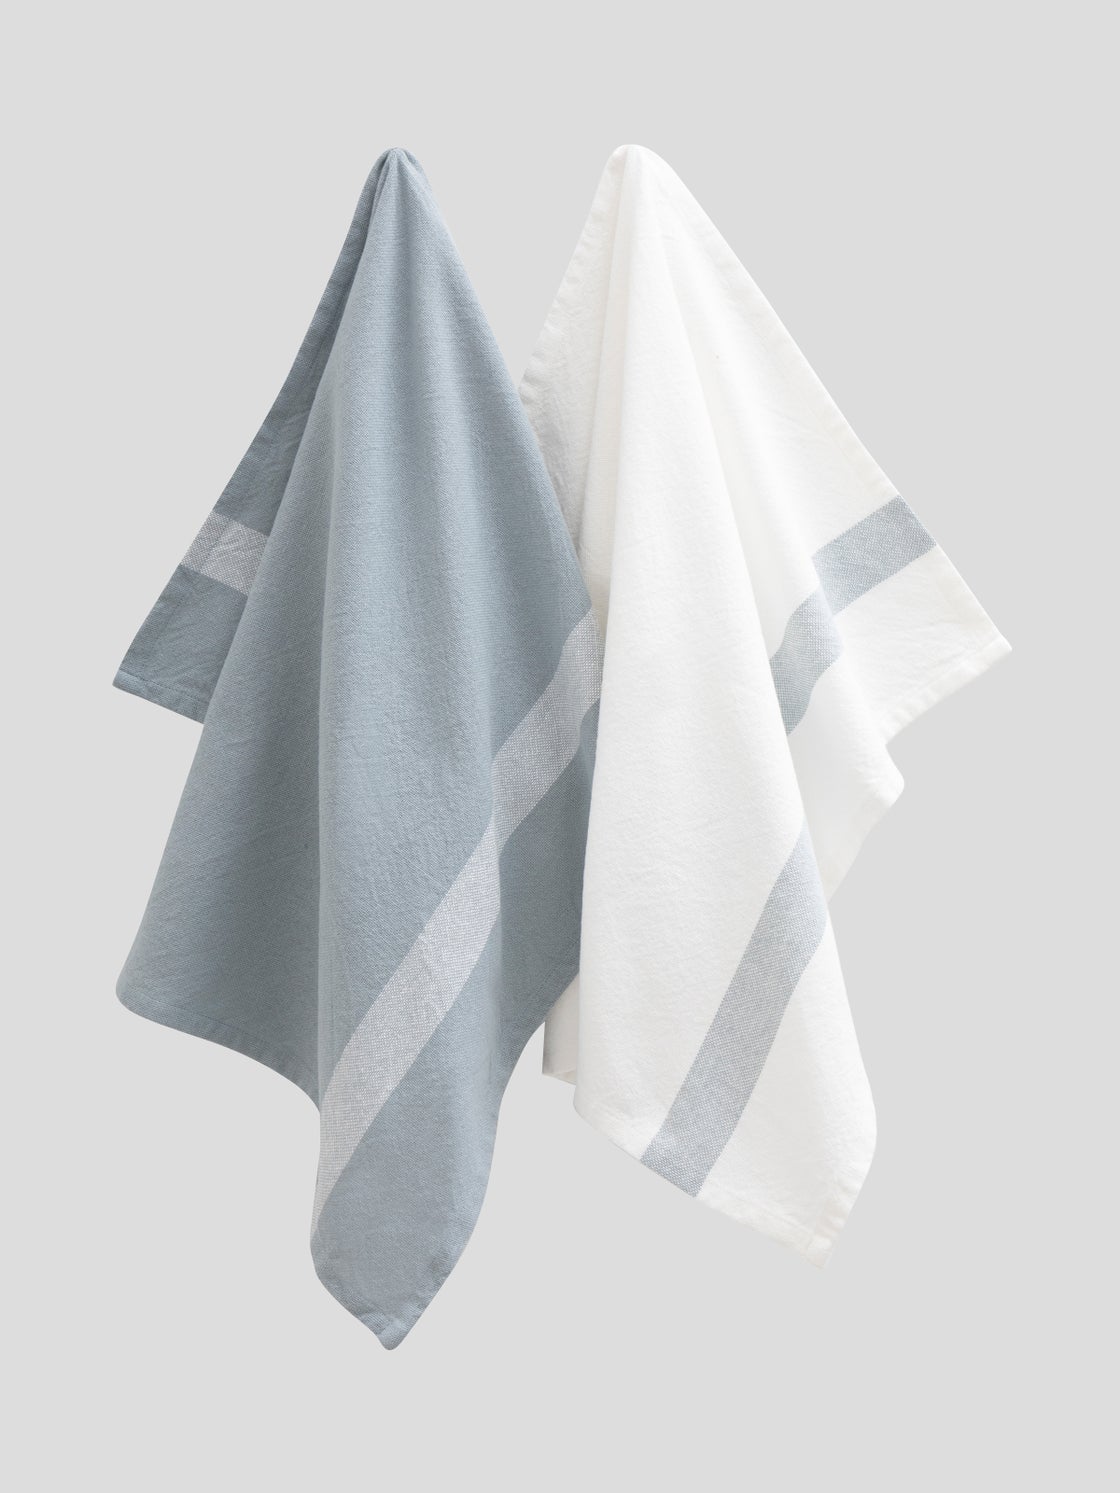 https://www.wallacecotton.com/content/products/beaumont-tea-towel-set-of-2-blue-white-1-8967.jpg?width=1120